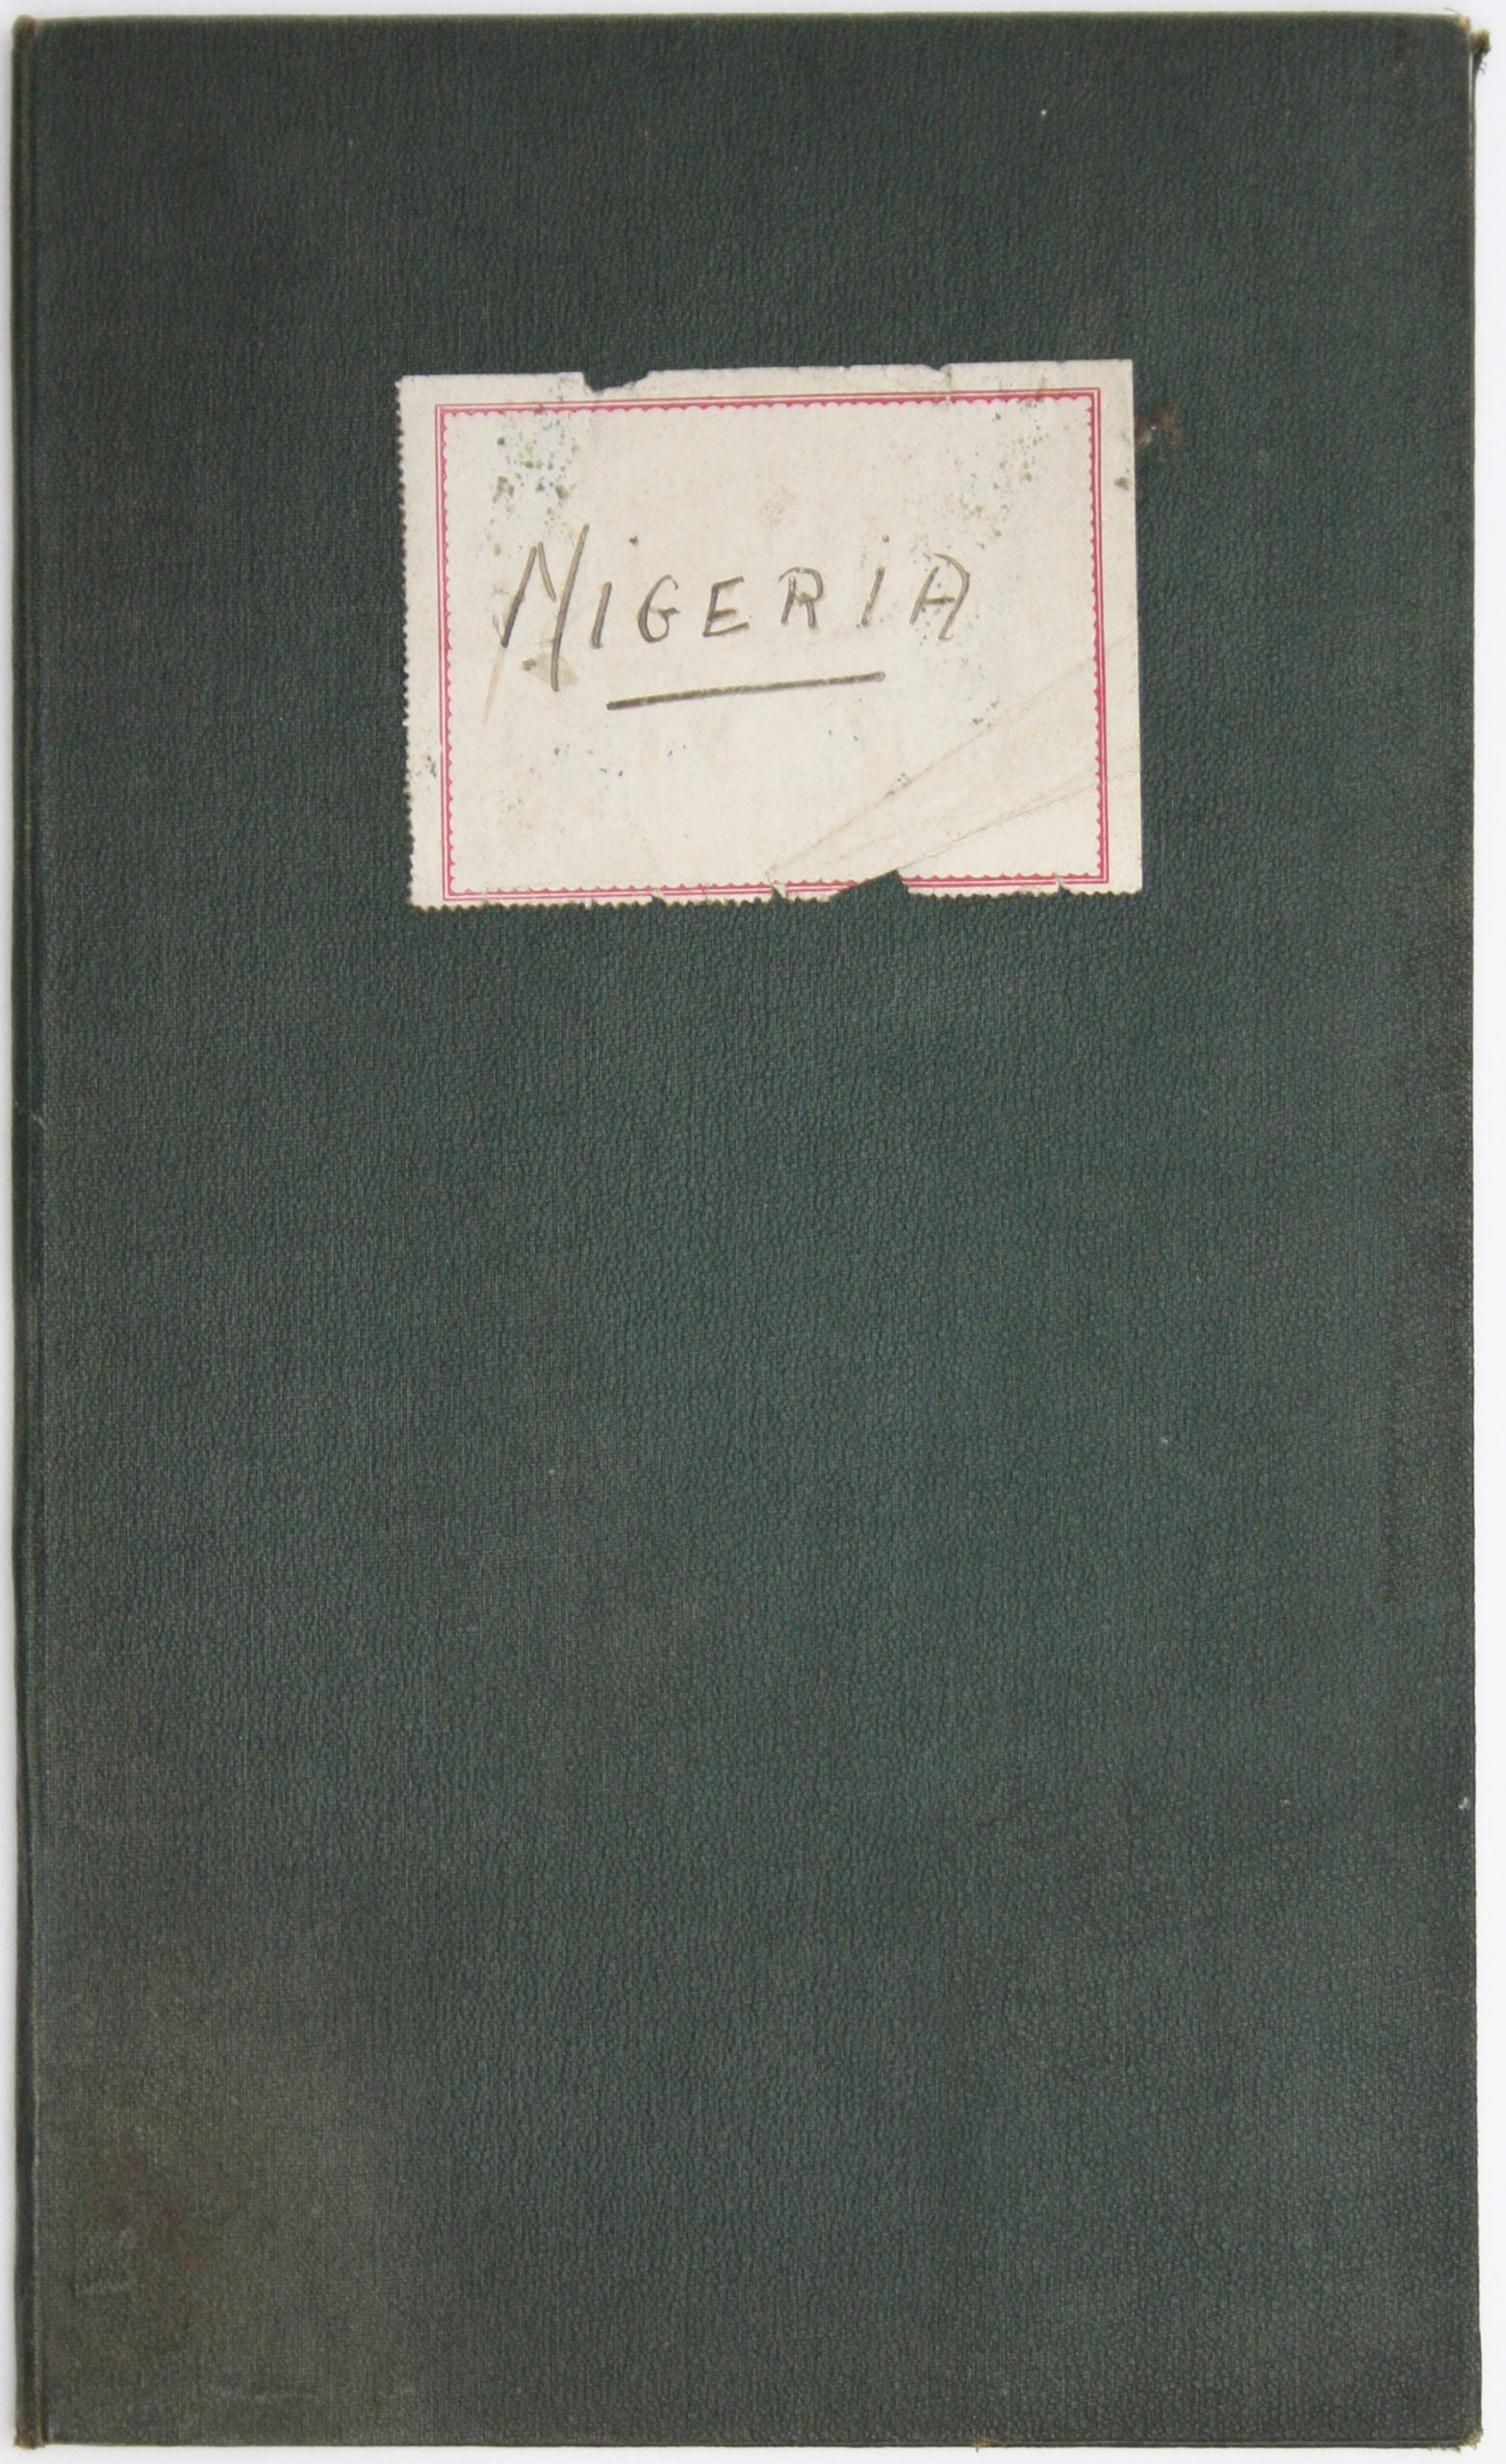 Stanford’s Map of the Railways of Nigeria